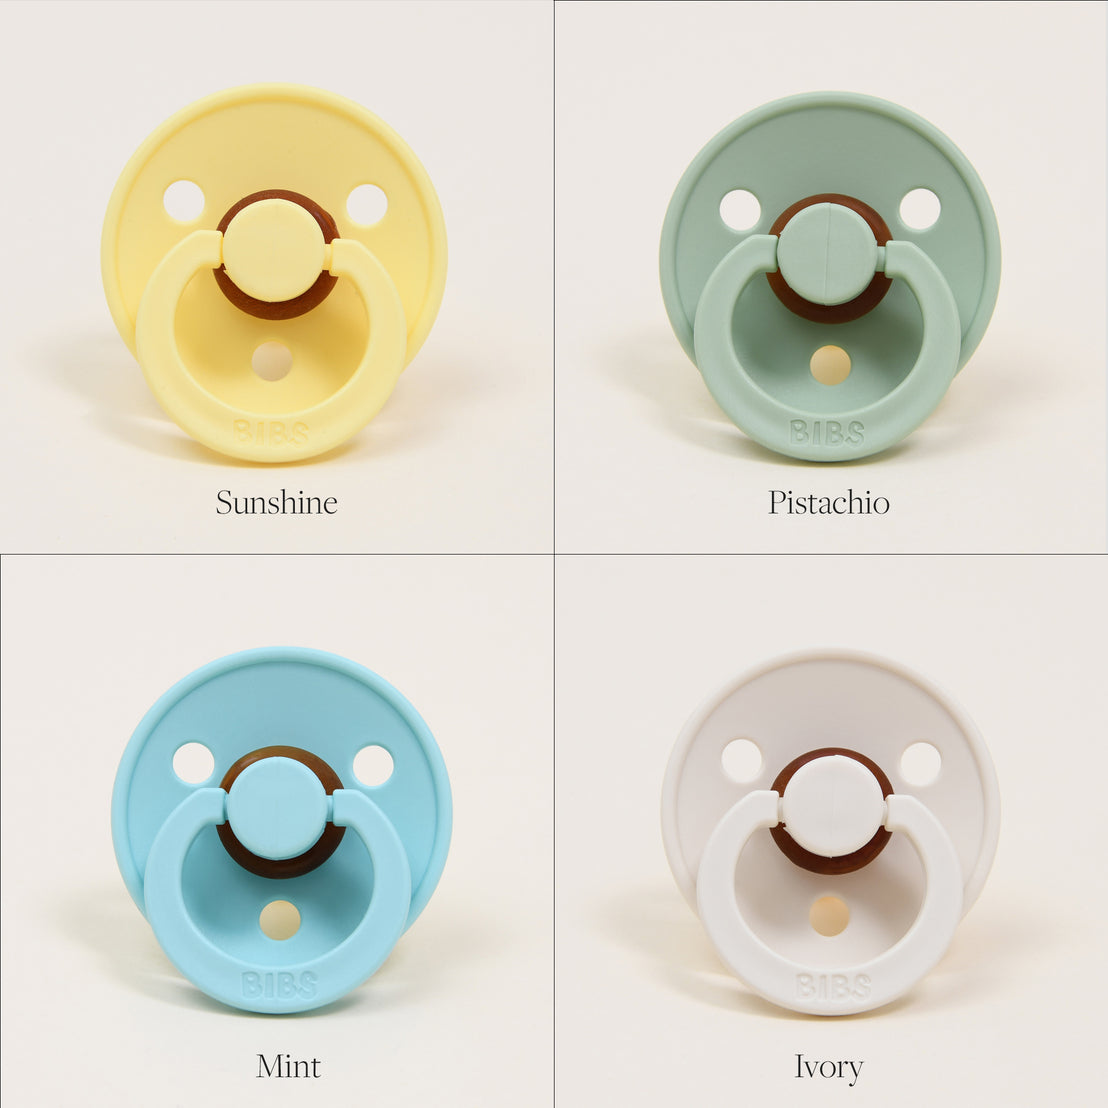 Four Bibs Pacifiers in different colors labeled as sunshine, pistachio, mint, and ivory, displayed against a plain background. Each pacifier has a distinctive round shield and button handle.